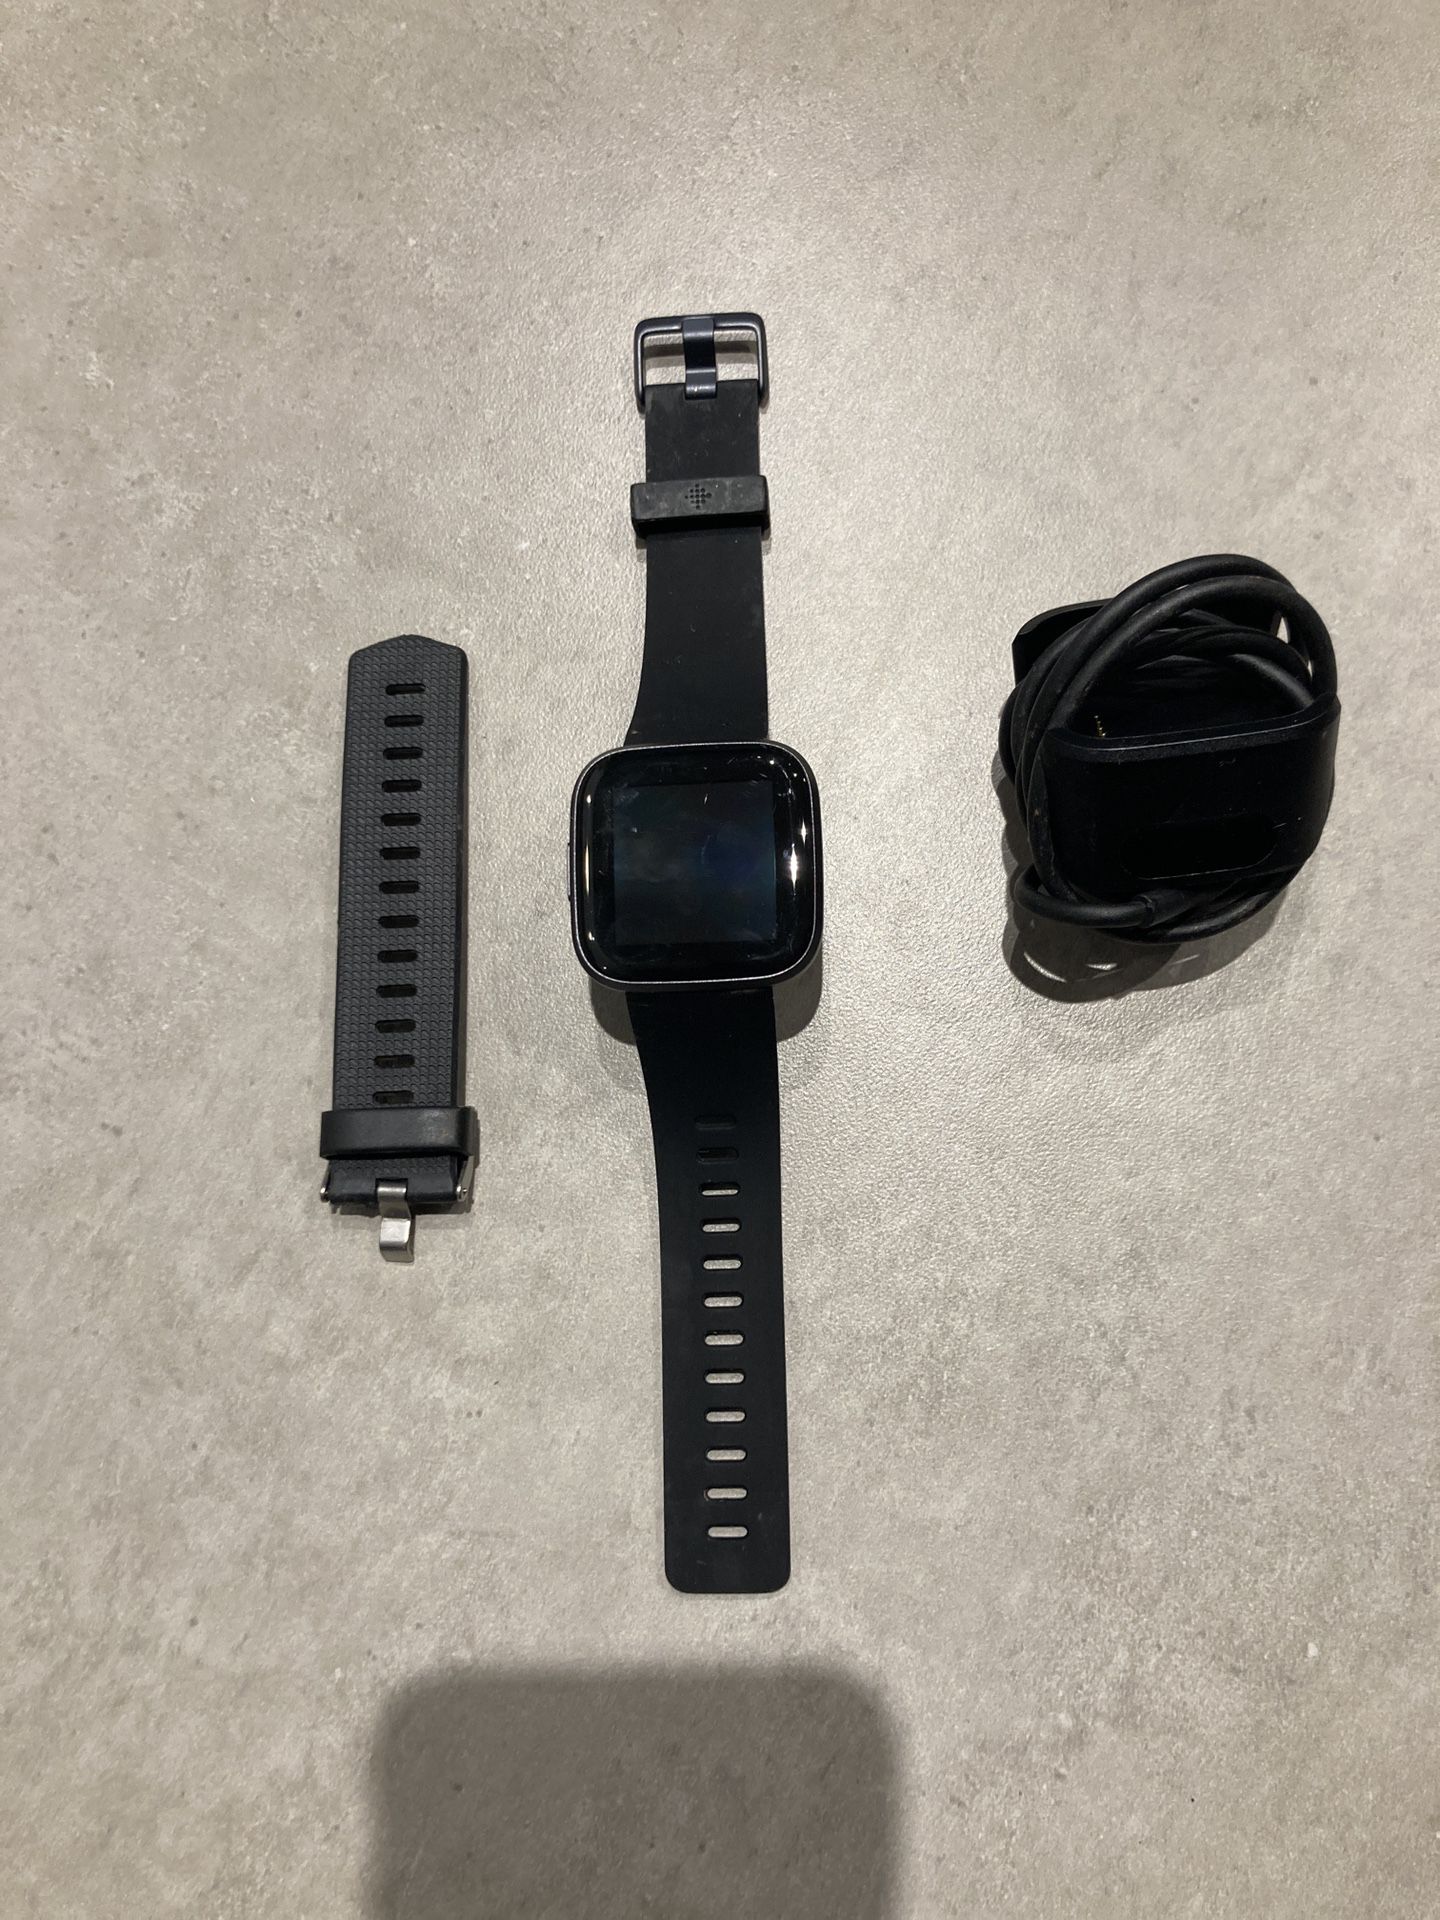 Fitbit Versa 2 Black/Carbon w/ Extra Band & Charger.  Excellent Condition